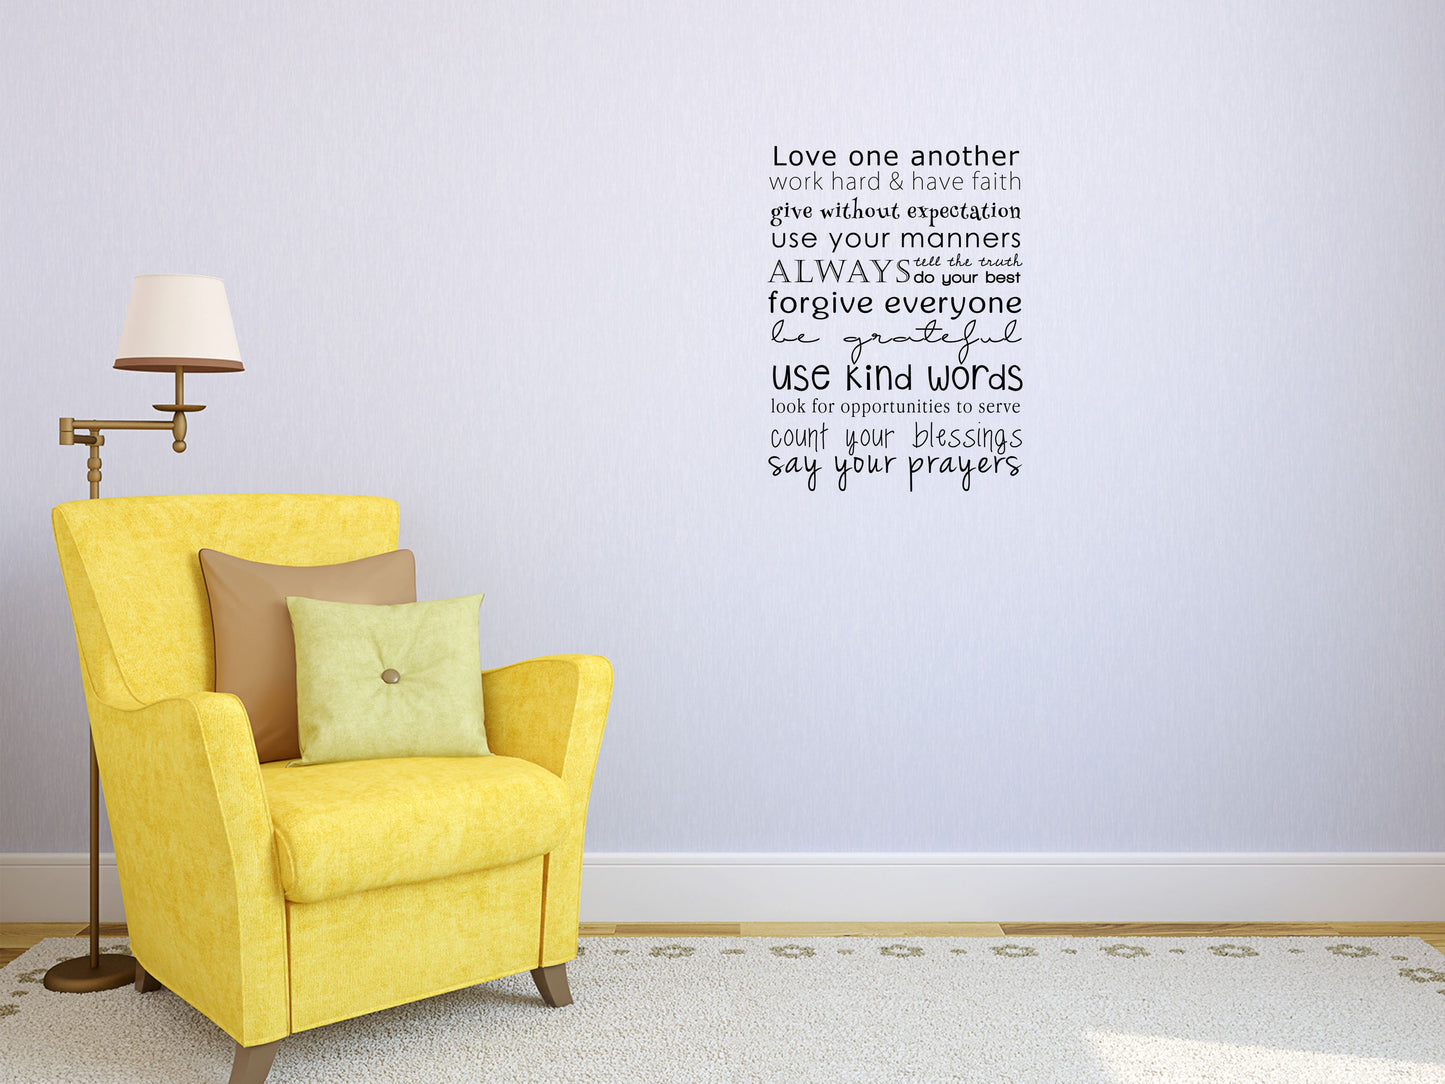 Love One Another, Work Hard & Have Faith - Inspirational Wall Decals Vinyl Wall Decal Inspirational Wall Signs 